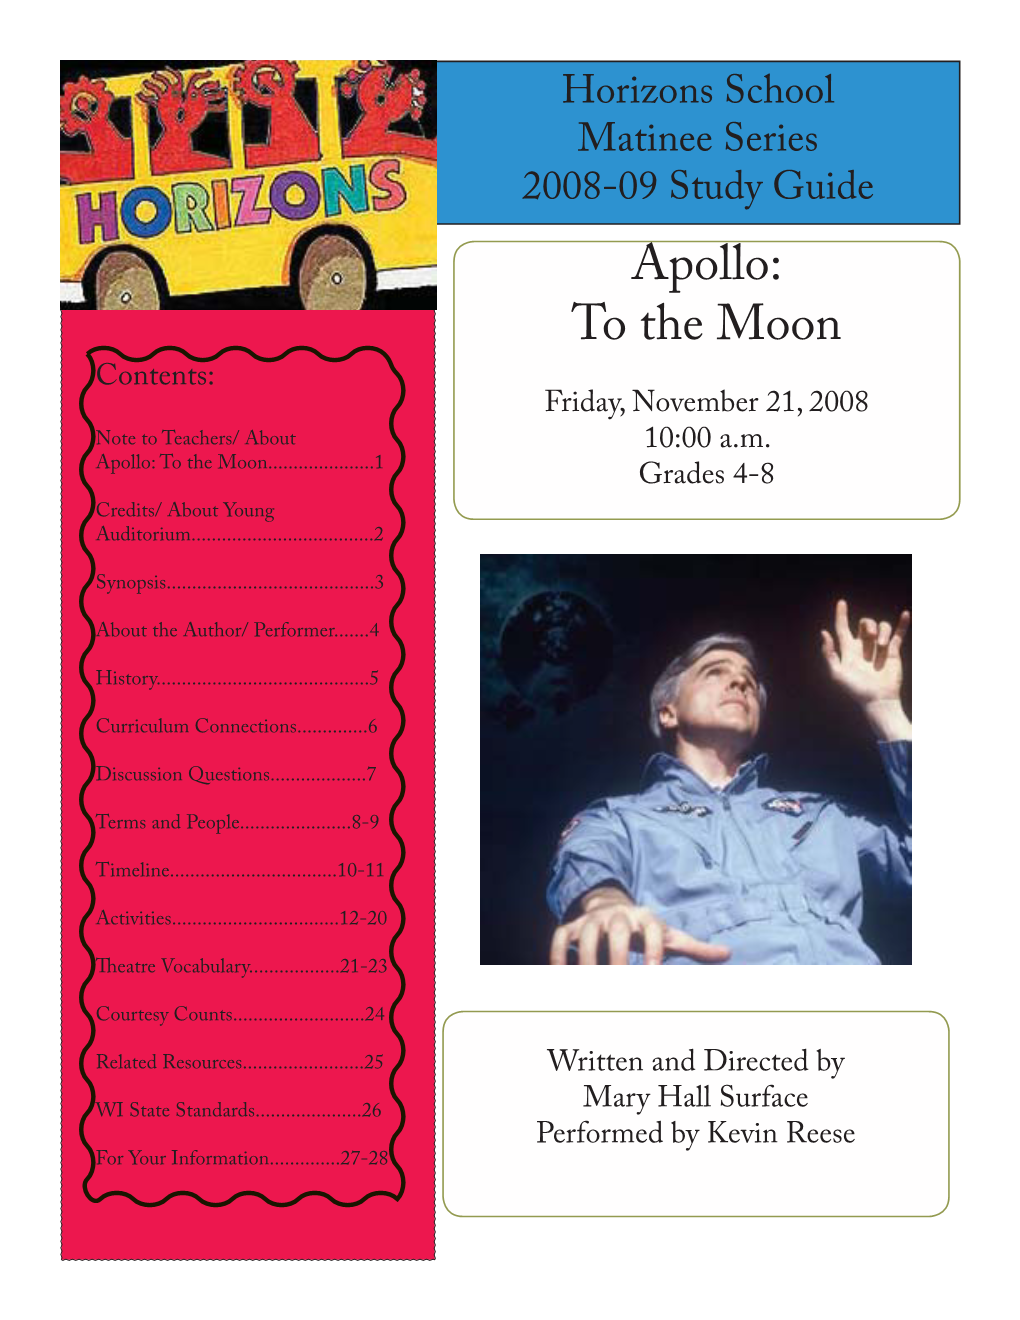 Apollo: to the Moon Contents: Friday, November 21, 2008 Note to Teachers/ About 10:00 A.M